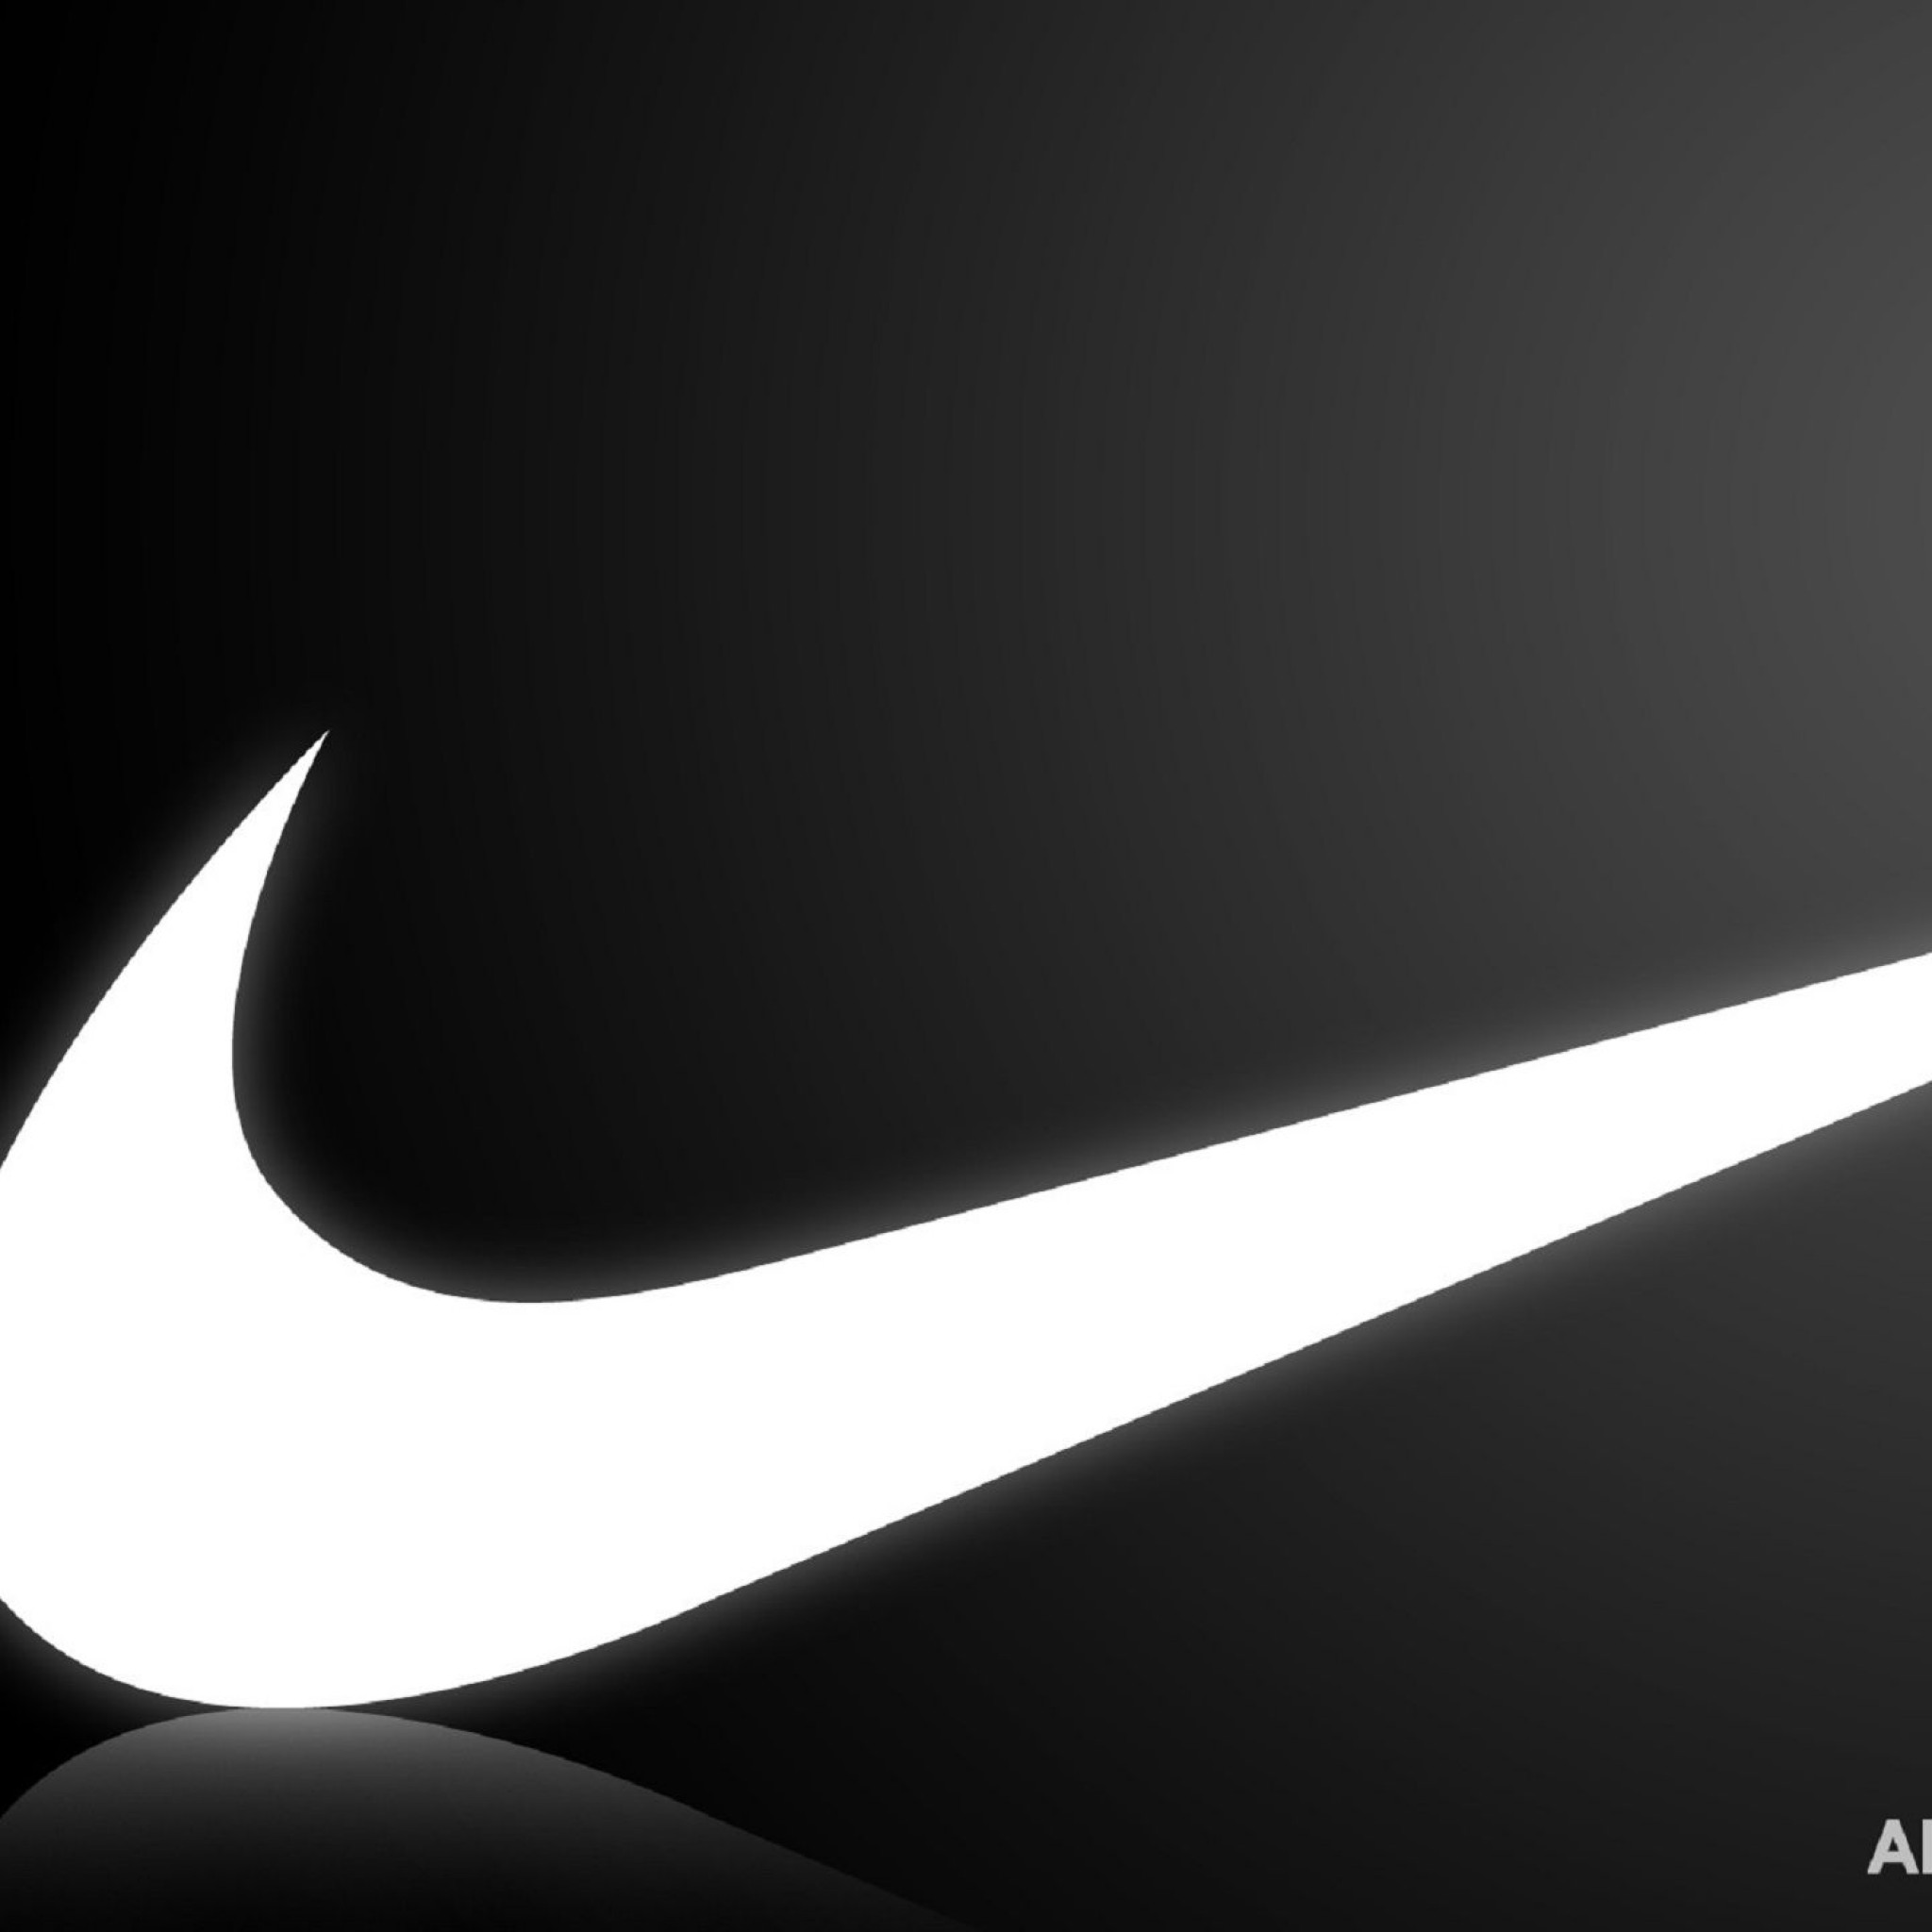 Free Download Popular New For Iphone5 For Ios7 For Iphone4 For Android 48x48 For Your Desktop Mobile Tablet Explore 50 Nike Wallpaper For Iphone Nike Sb Logo Wallpaper Nike